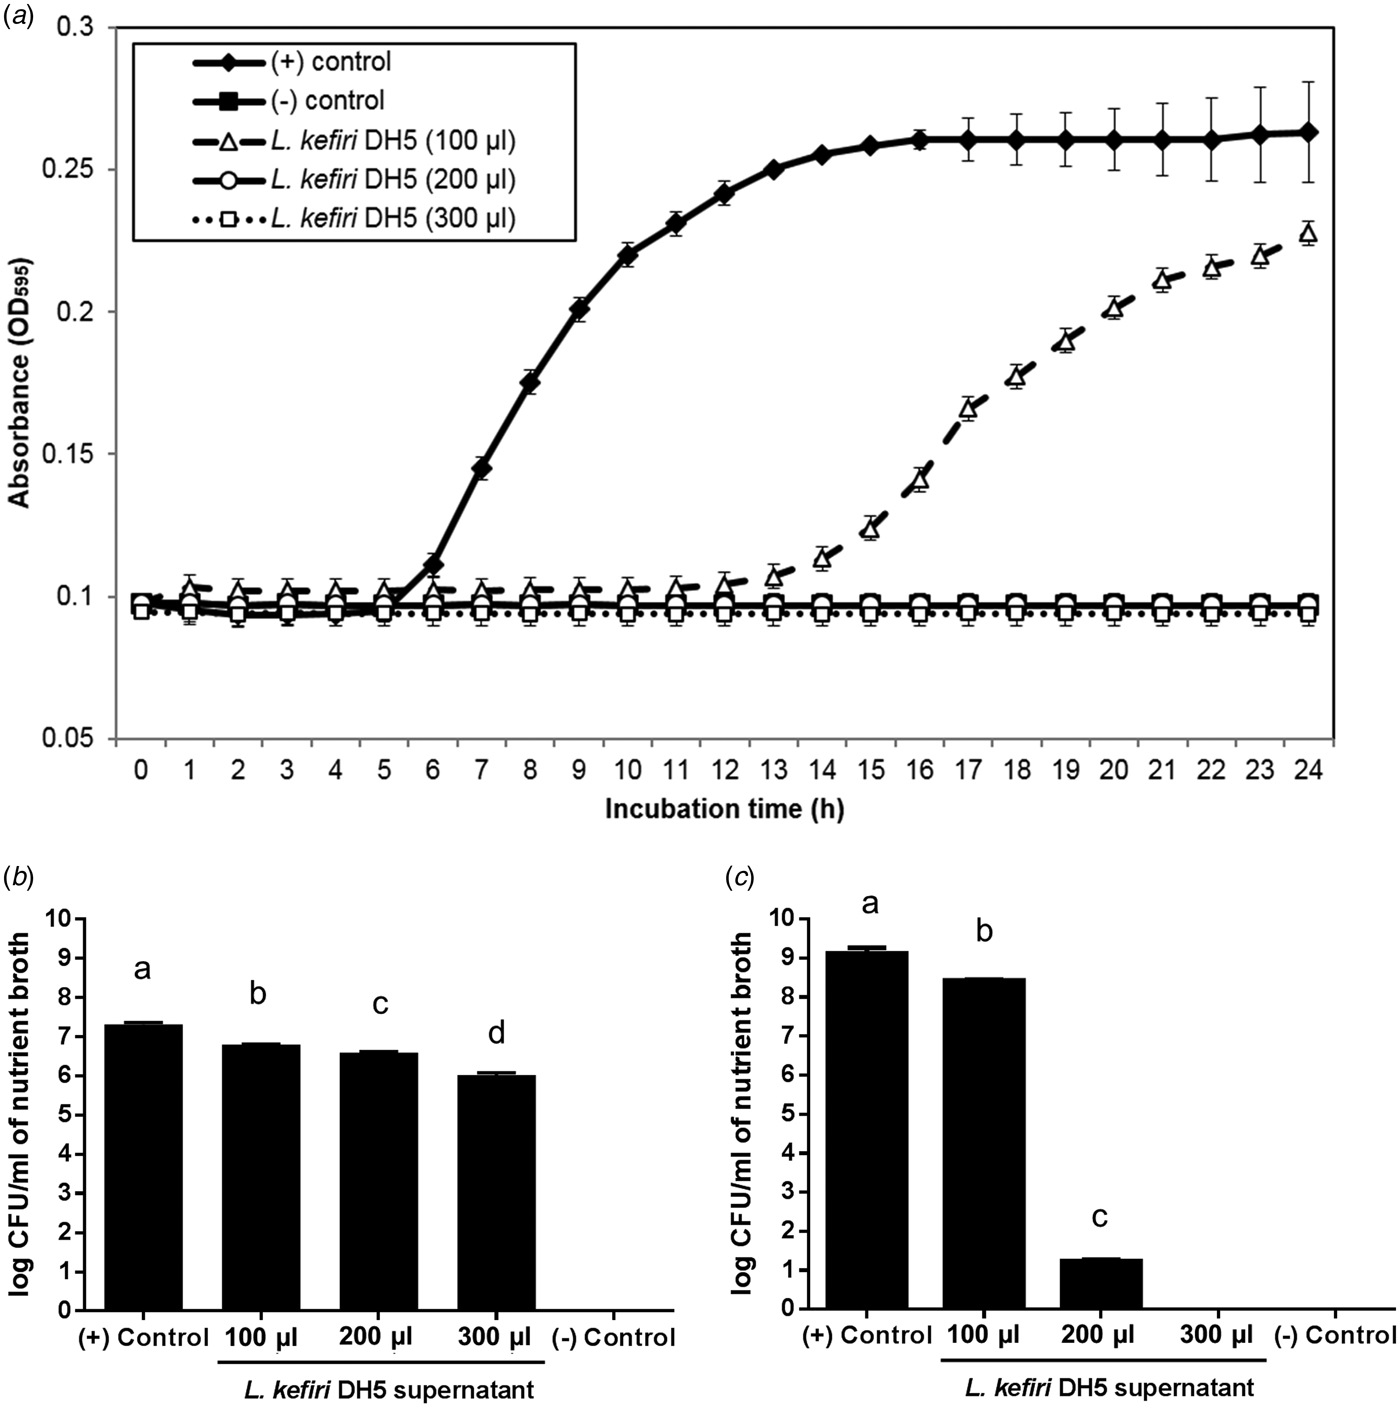 Cytotoxicity profile of Cronobacter species isolated from food and